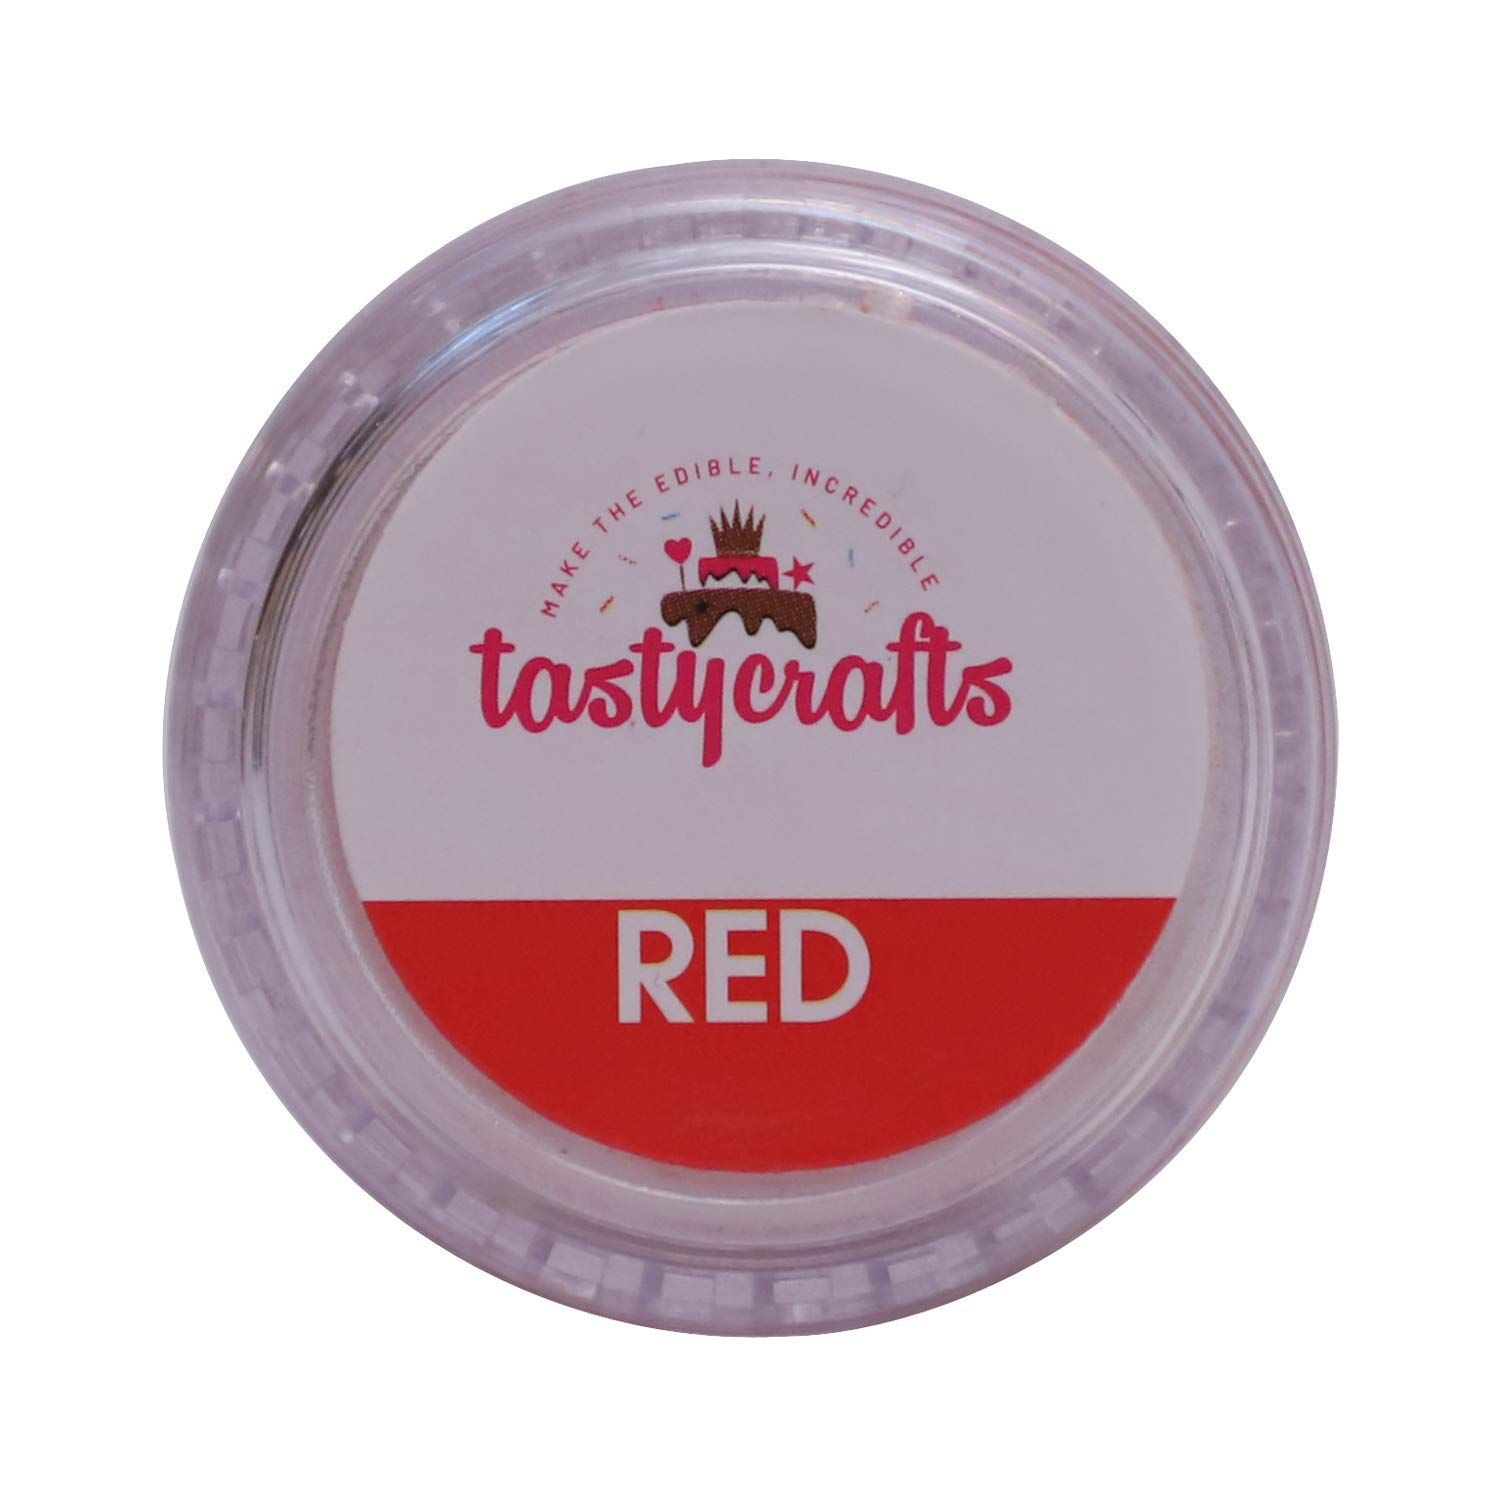 Tasty crafts Luster Dust Red Image